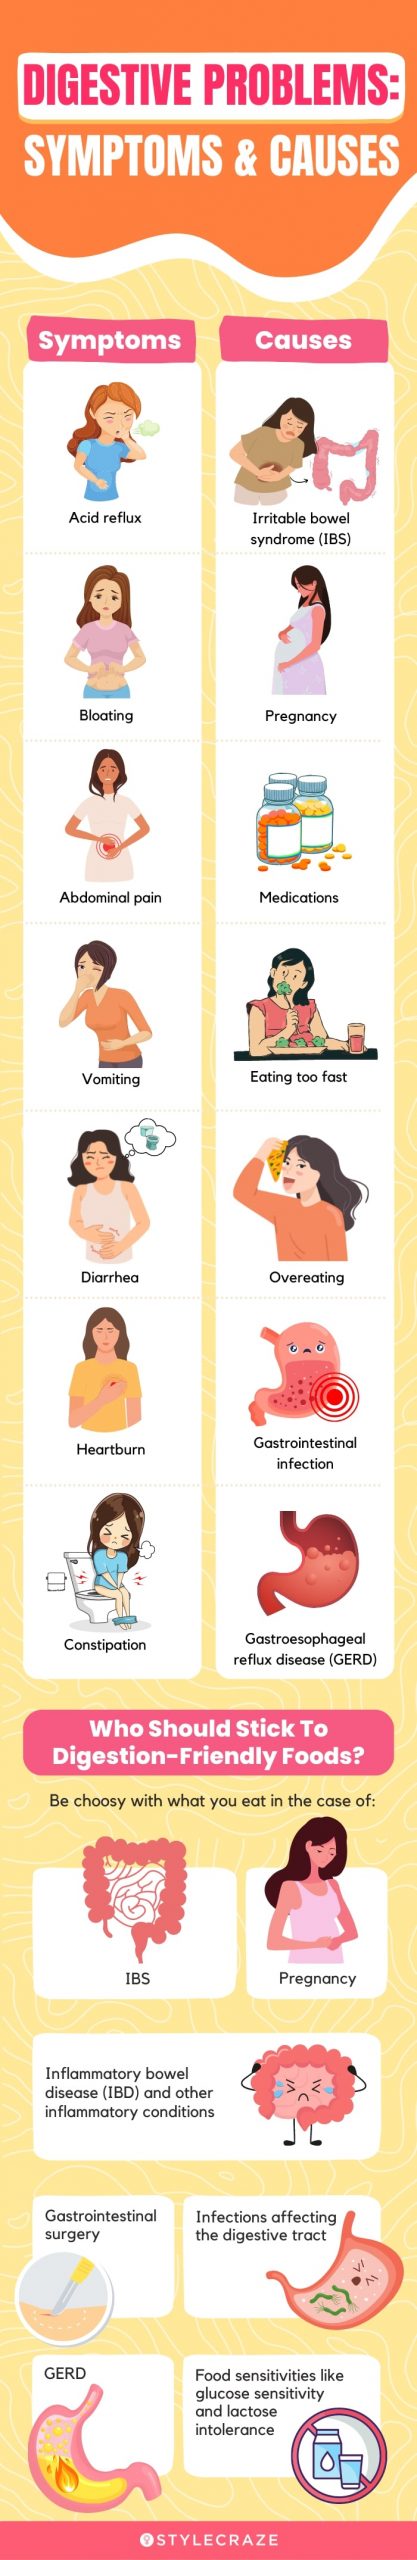 digestive problems symptoms and causes (infographic)